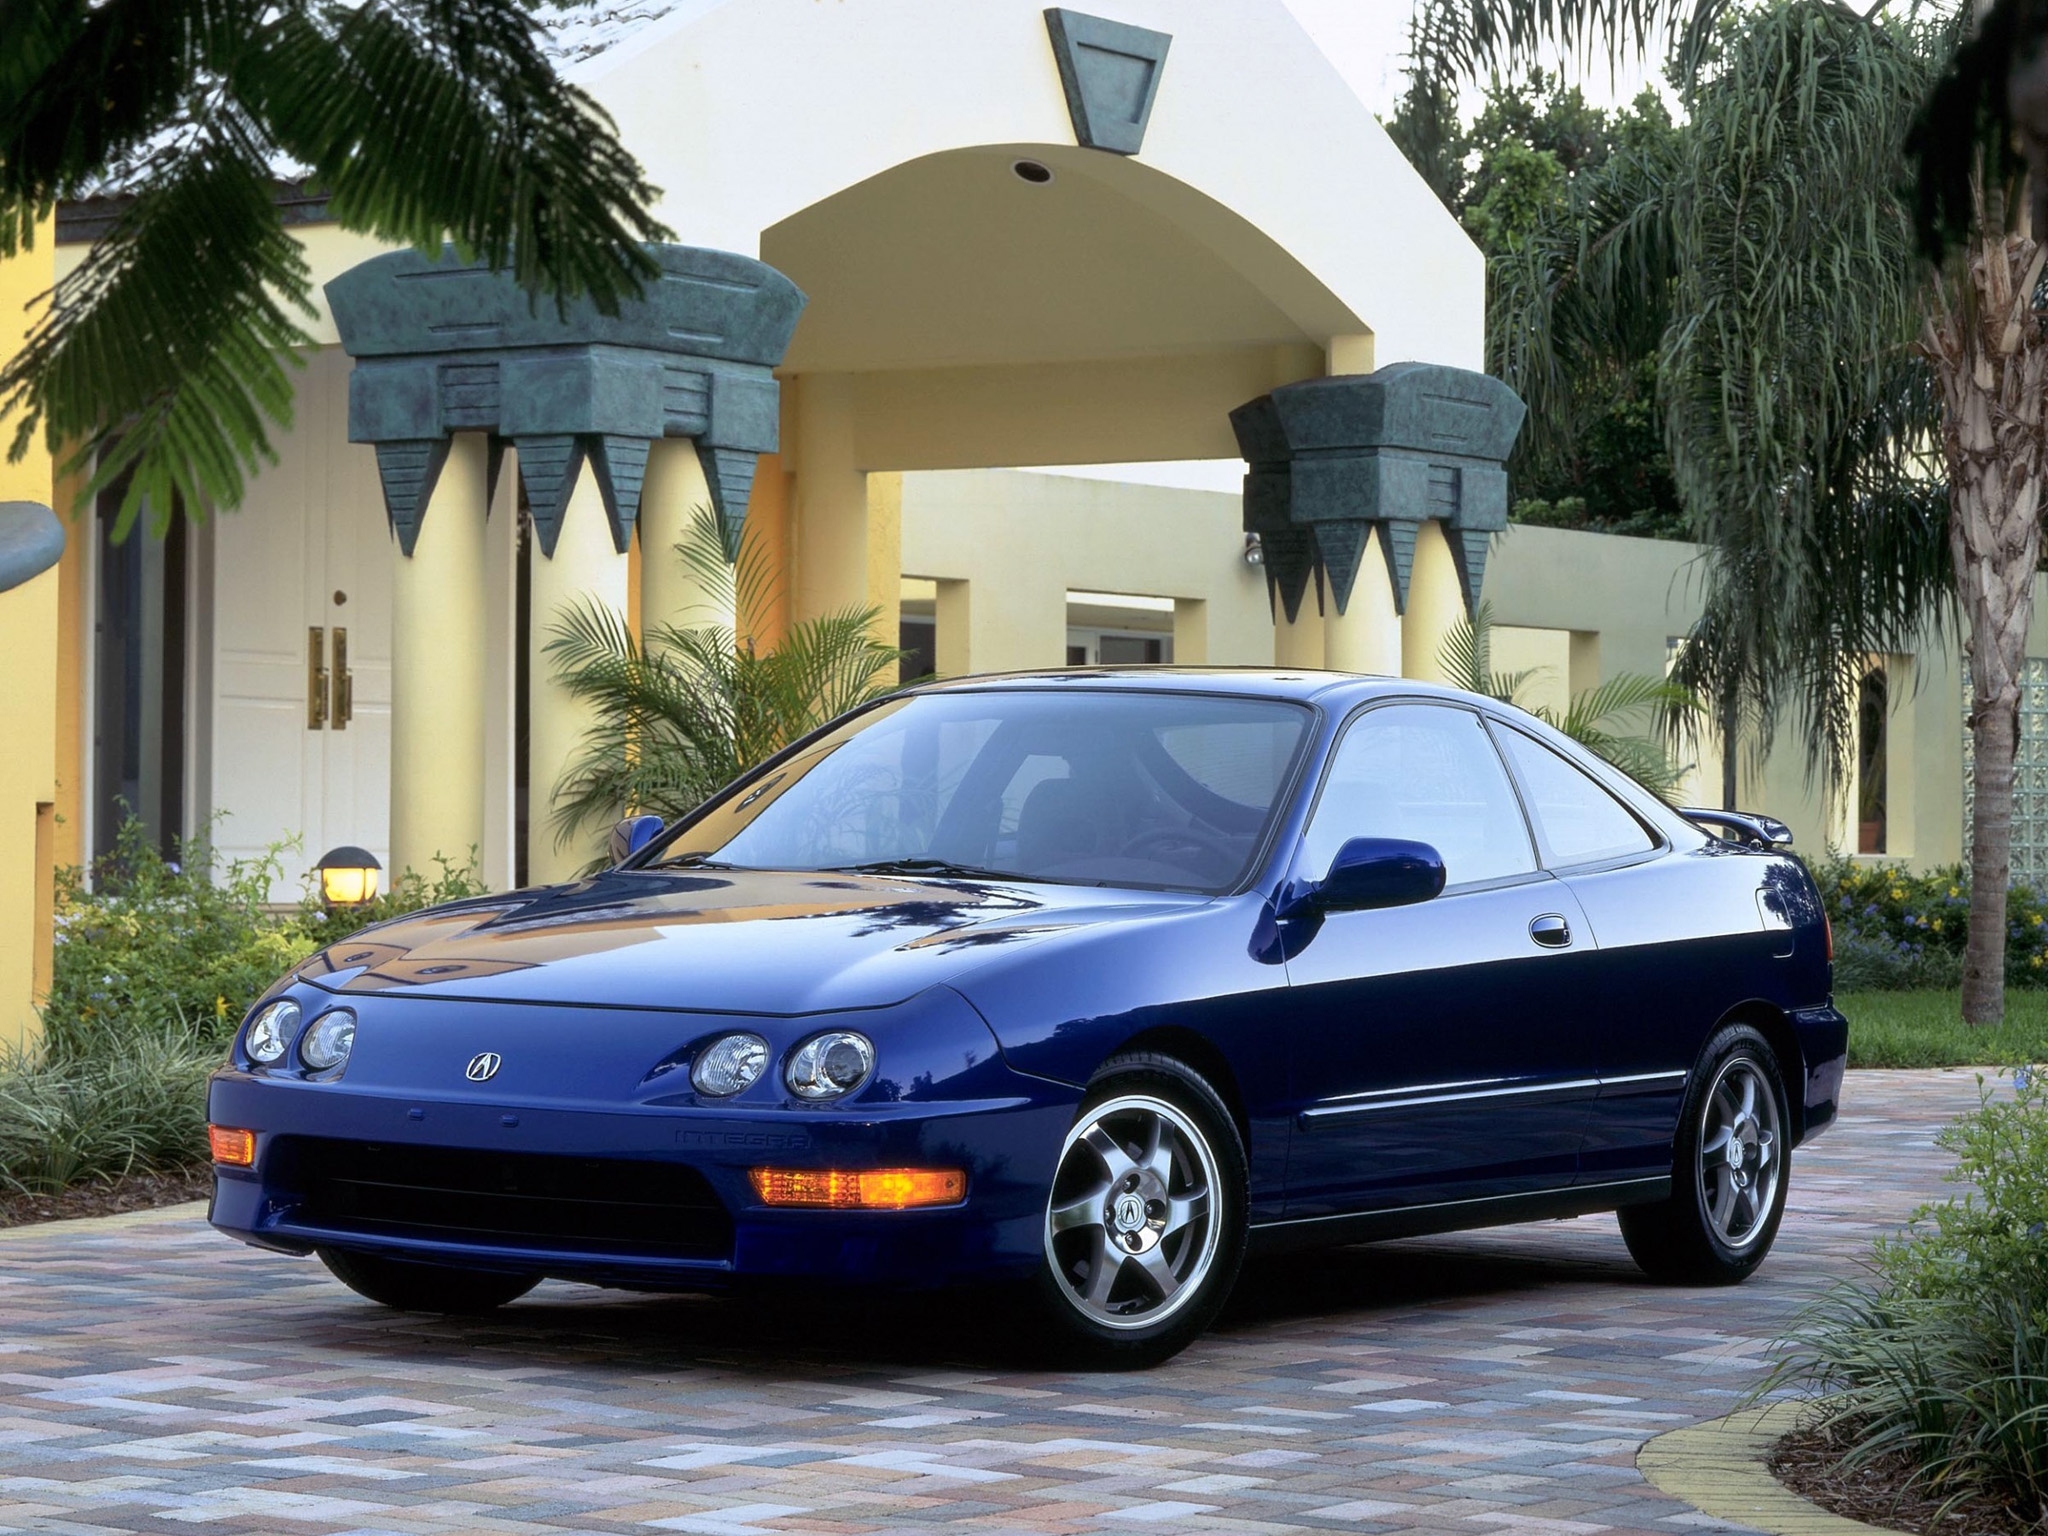 sports, auto, acura, cars, blue, building, front view, coupe, compartment, integra, gs r